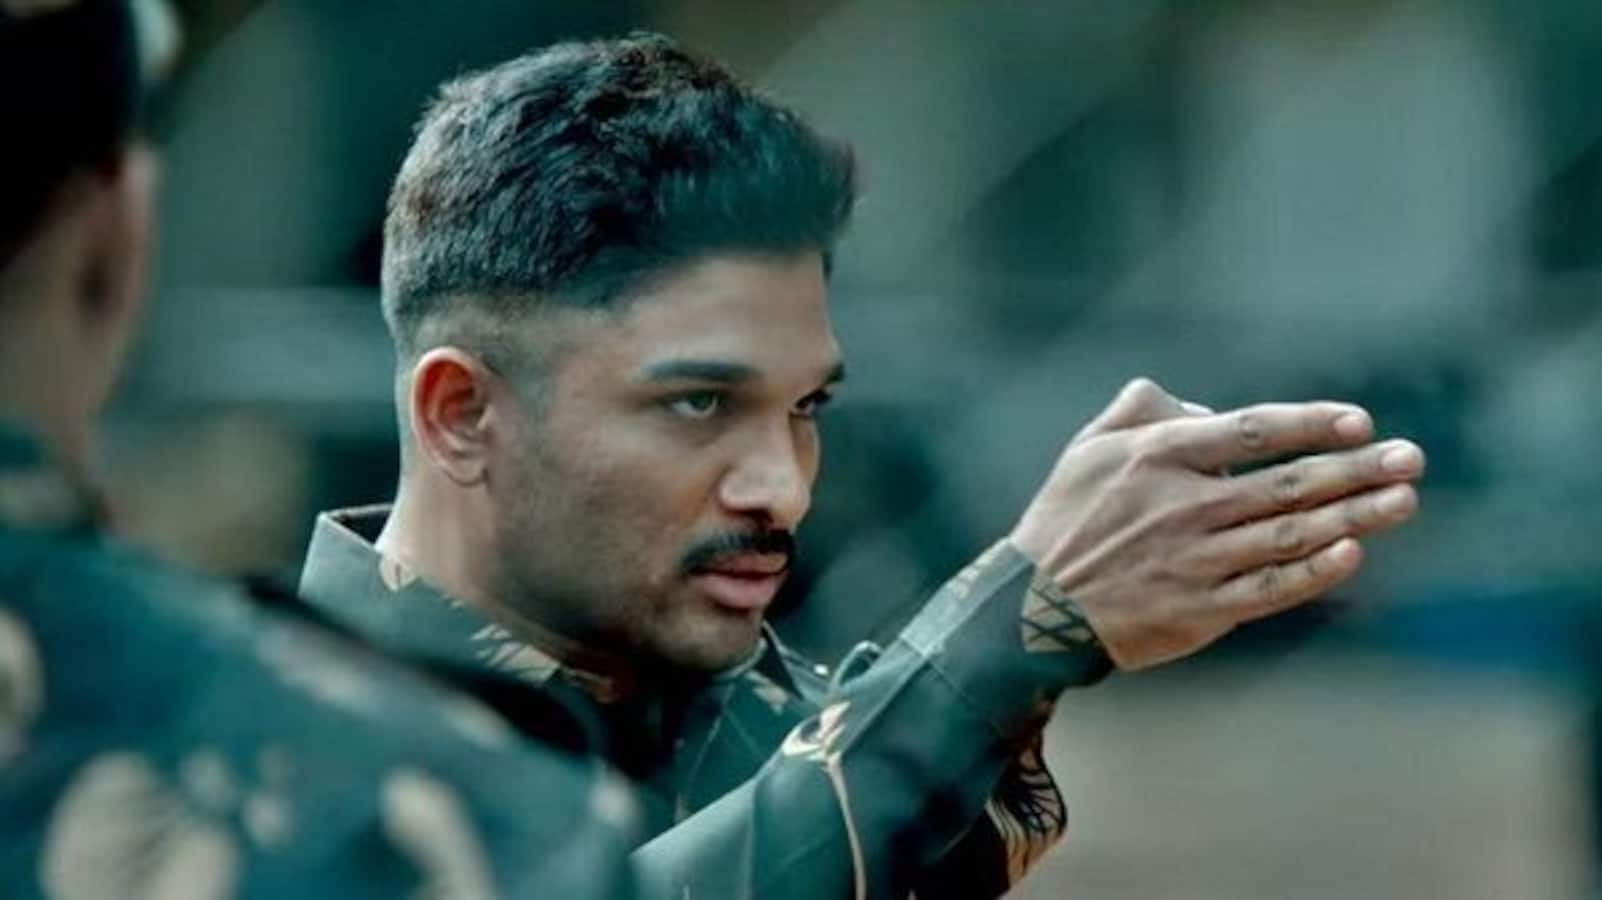 5 reasons why Allu Arjun's Naa Peru Surya is a movie to watch out for -  Bollywood News & Gossip, Movie Reviews, Trailers & Videos at  